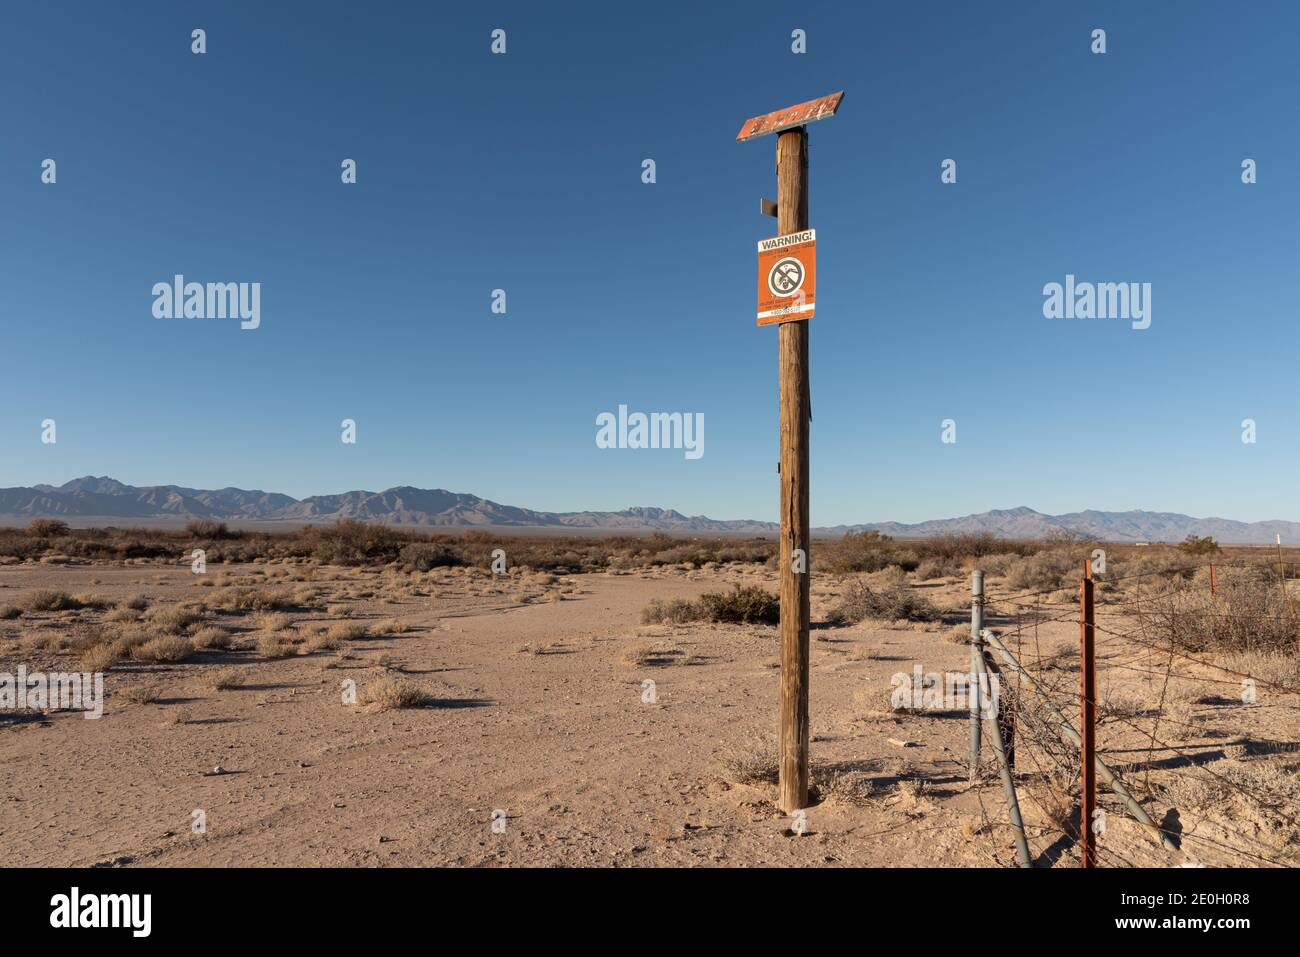 A caution sign on a tall wooden pole warns there is buried cable and no digging. Stock Photo